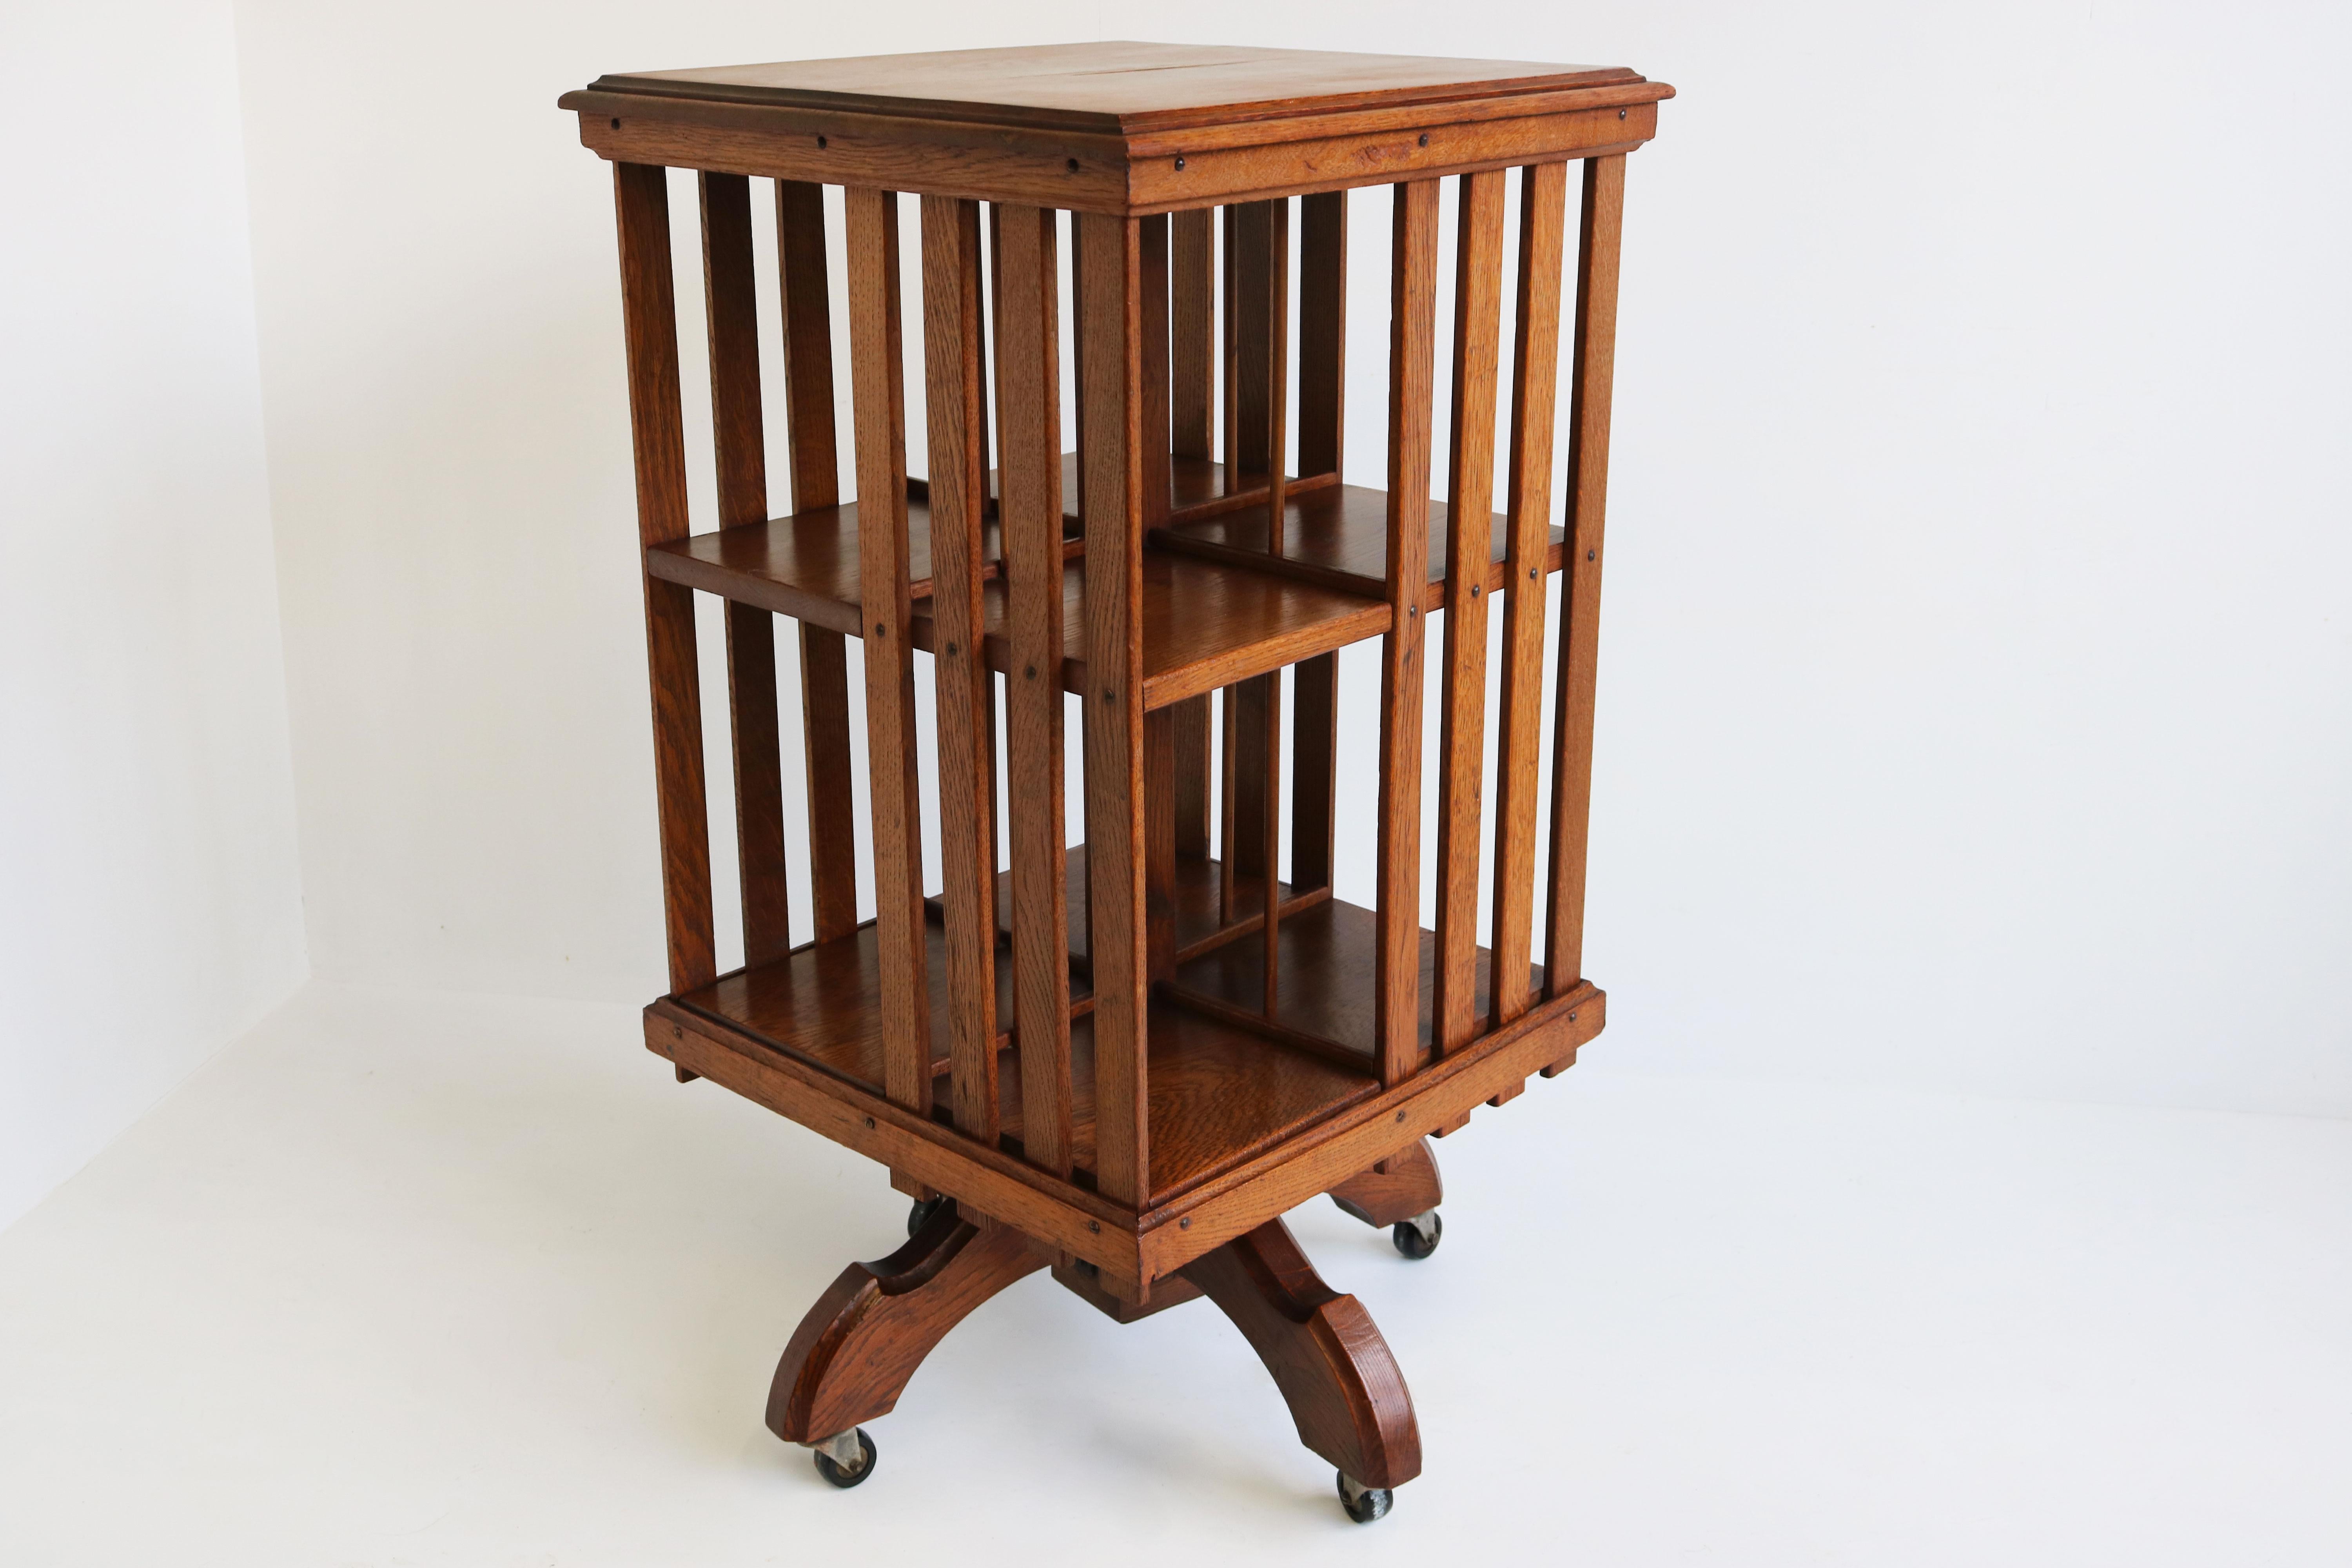 Antique Revolving Bookcase English 19th Century Tiger Oak Arts & Crafts Rotating For Sale 4